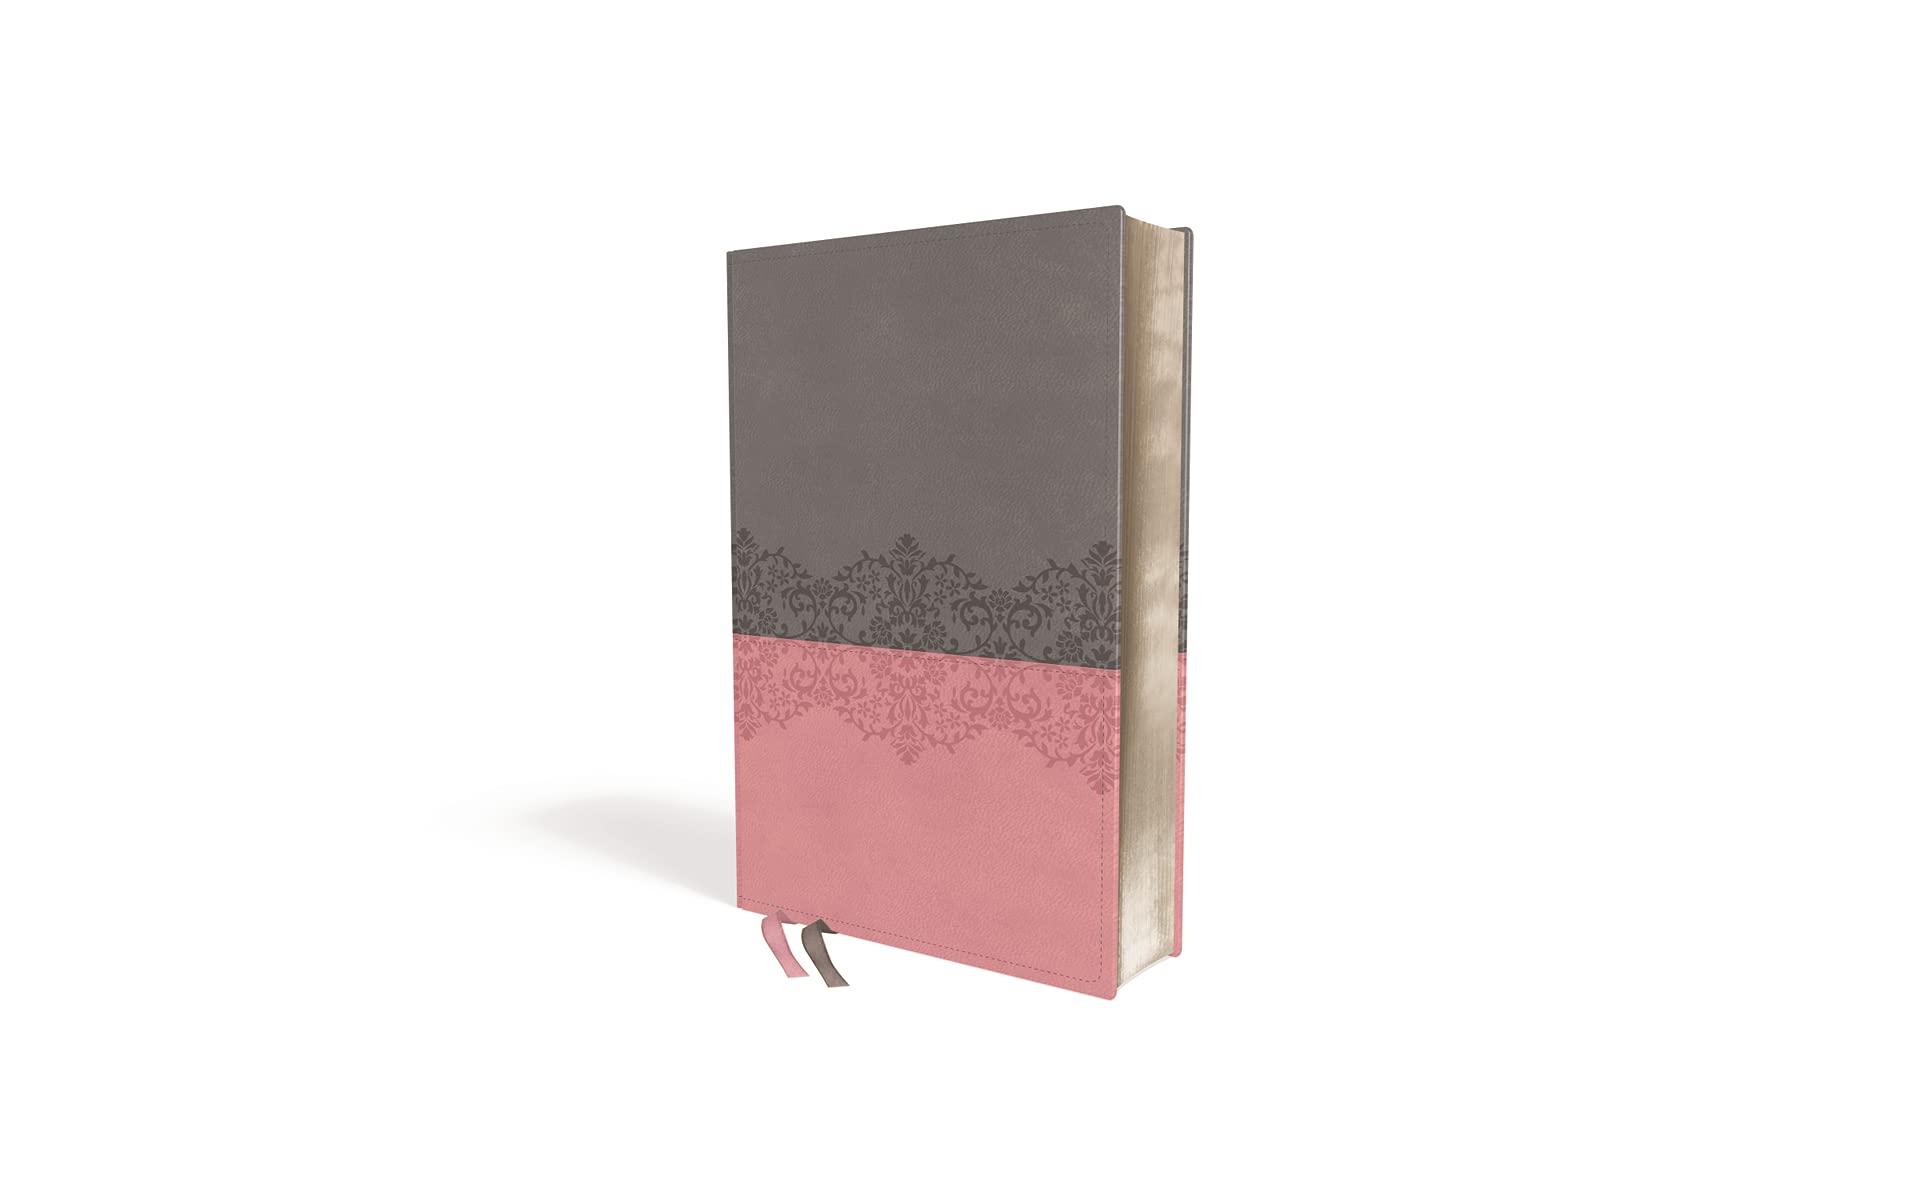 NIV, Life Application Study Bible, Third Edition, Leathersoft, Gray/Pink, Red Letter